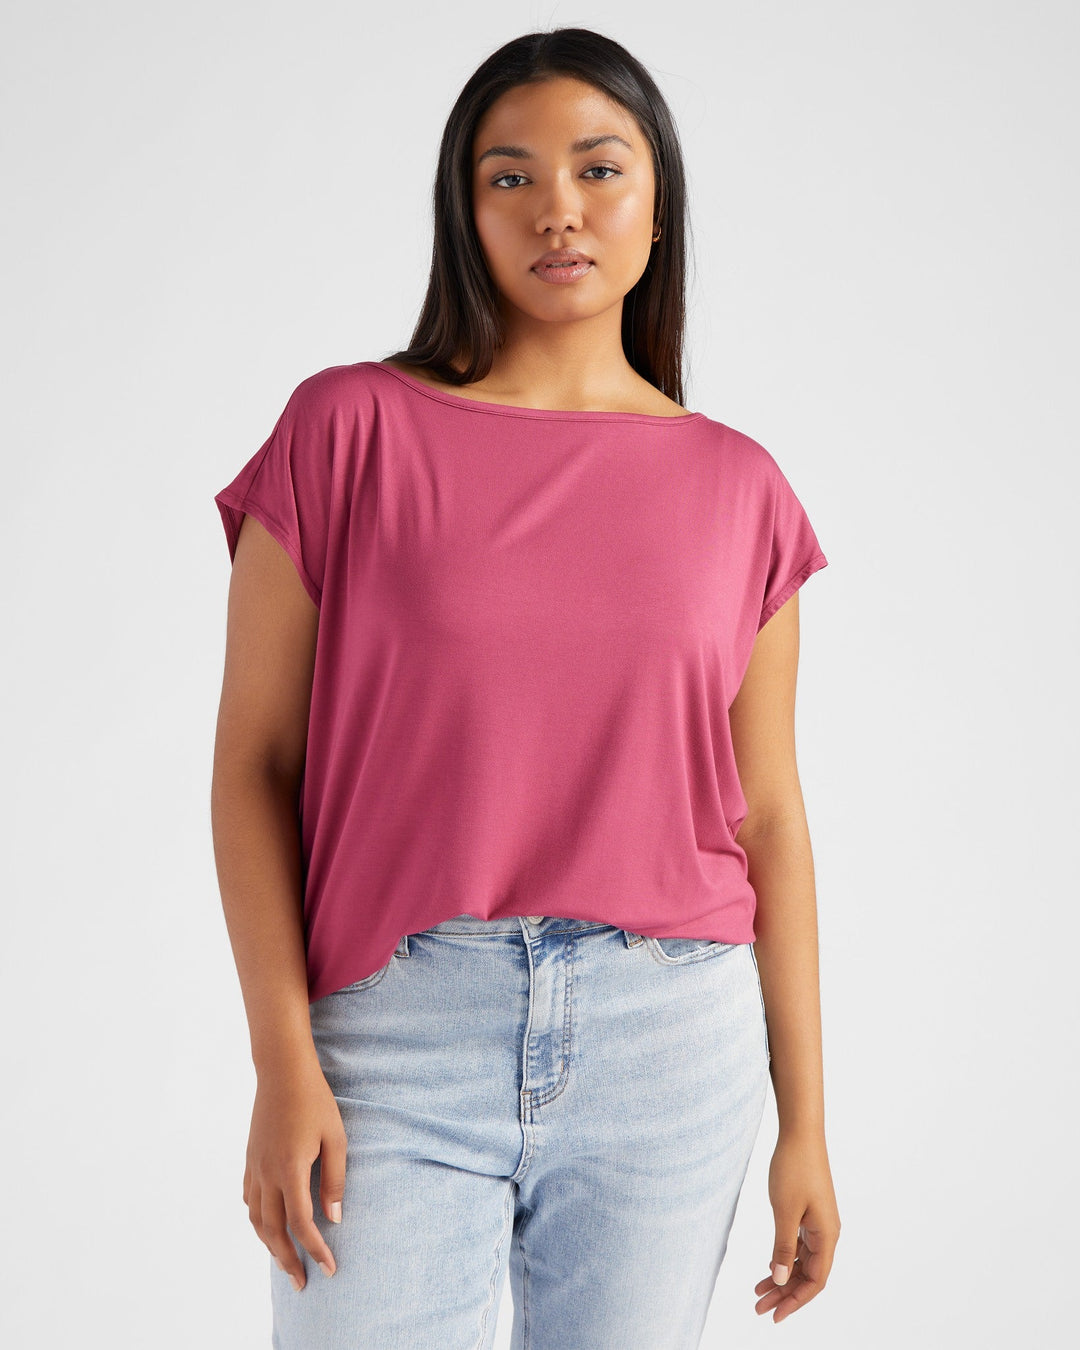 Sangria $|& 78&SUNNY Brentwood Boat Neck Top - SOF Front